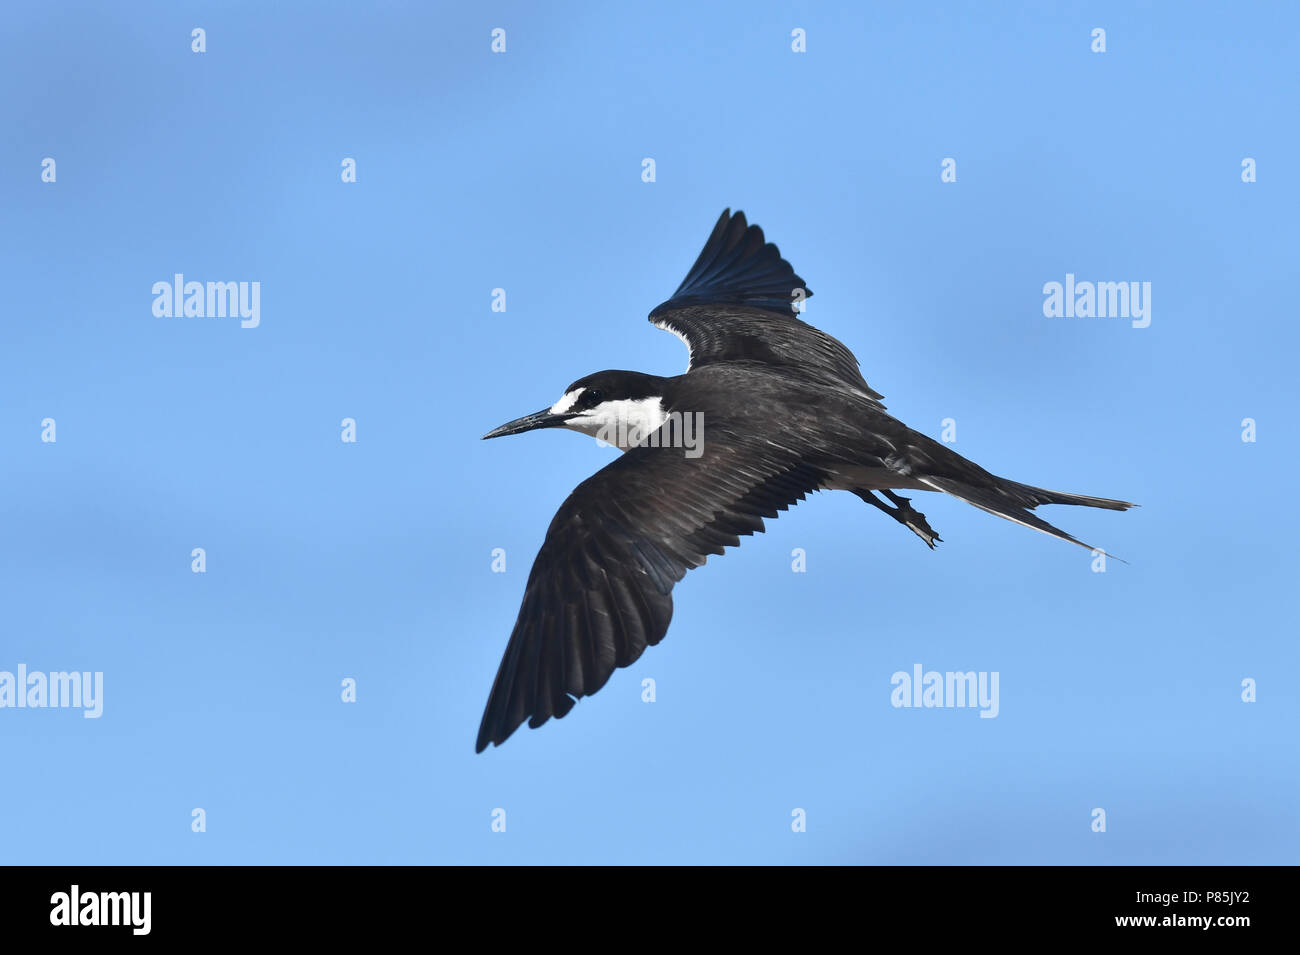 Adult Sooty Tern (Onychoprion fuscatus) in flight Stock Photo